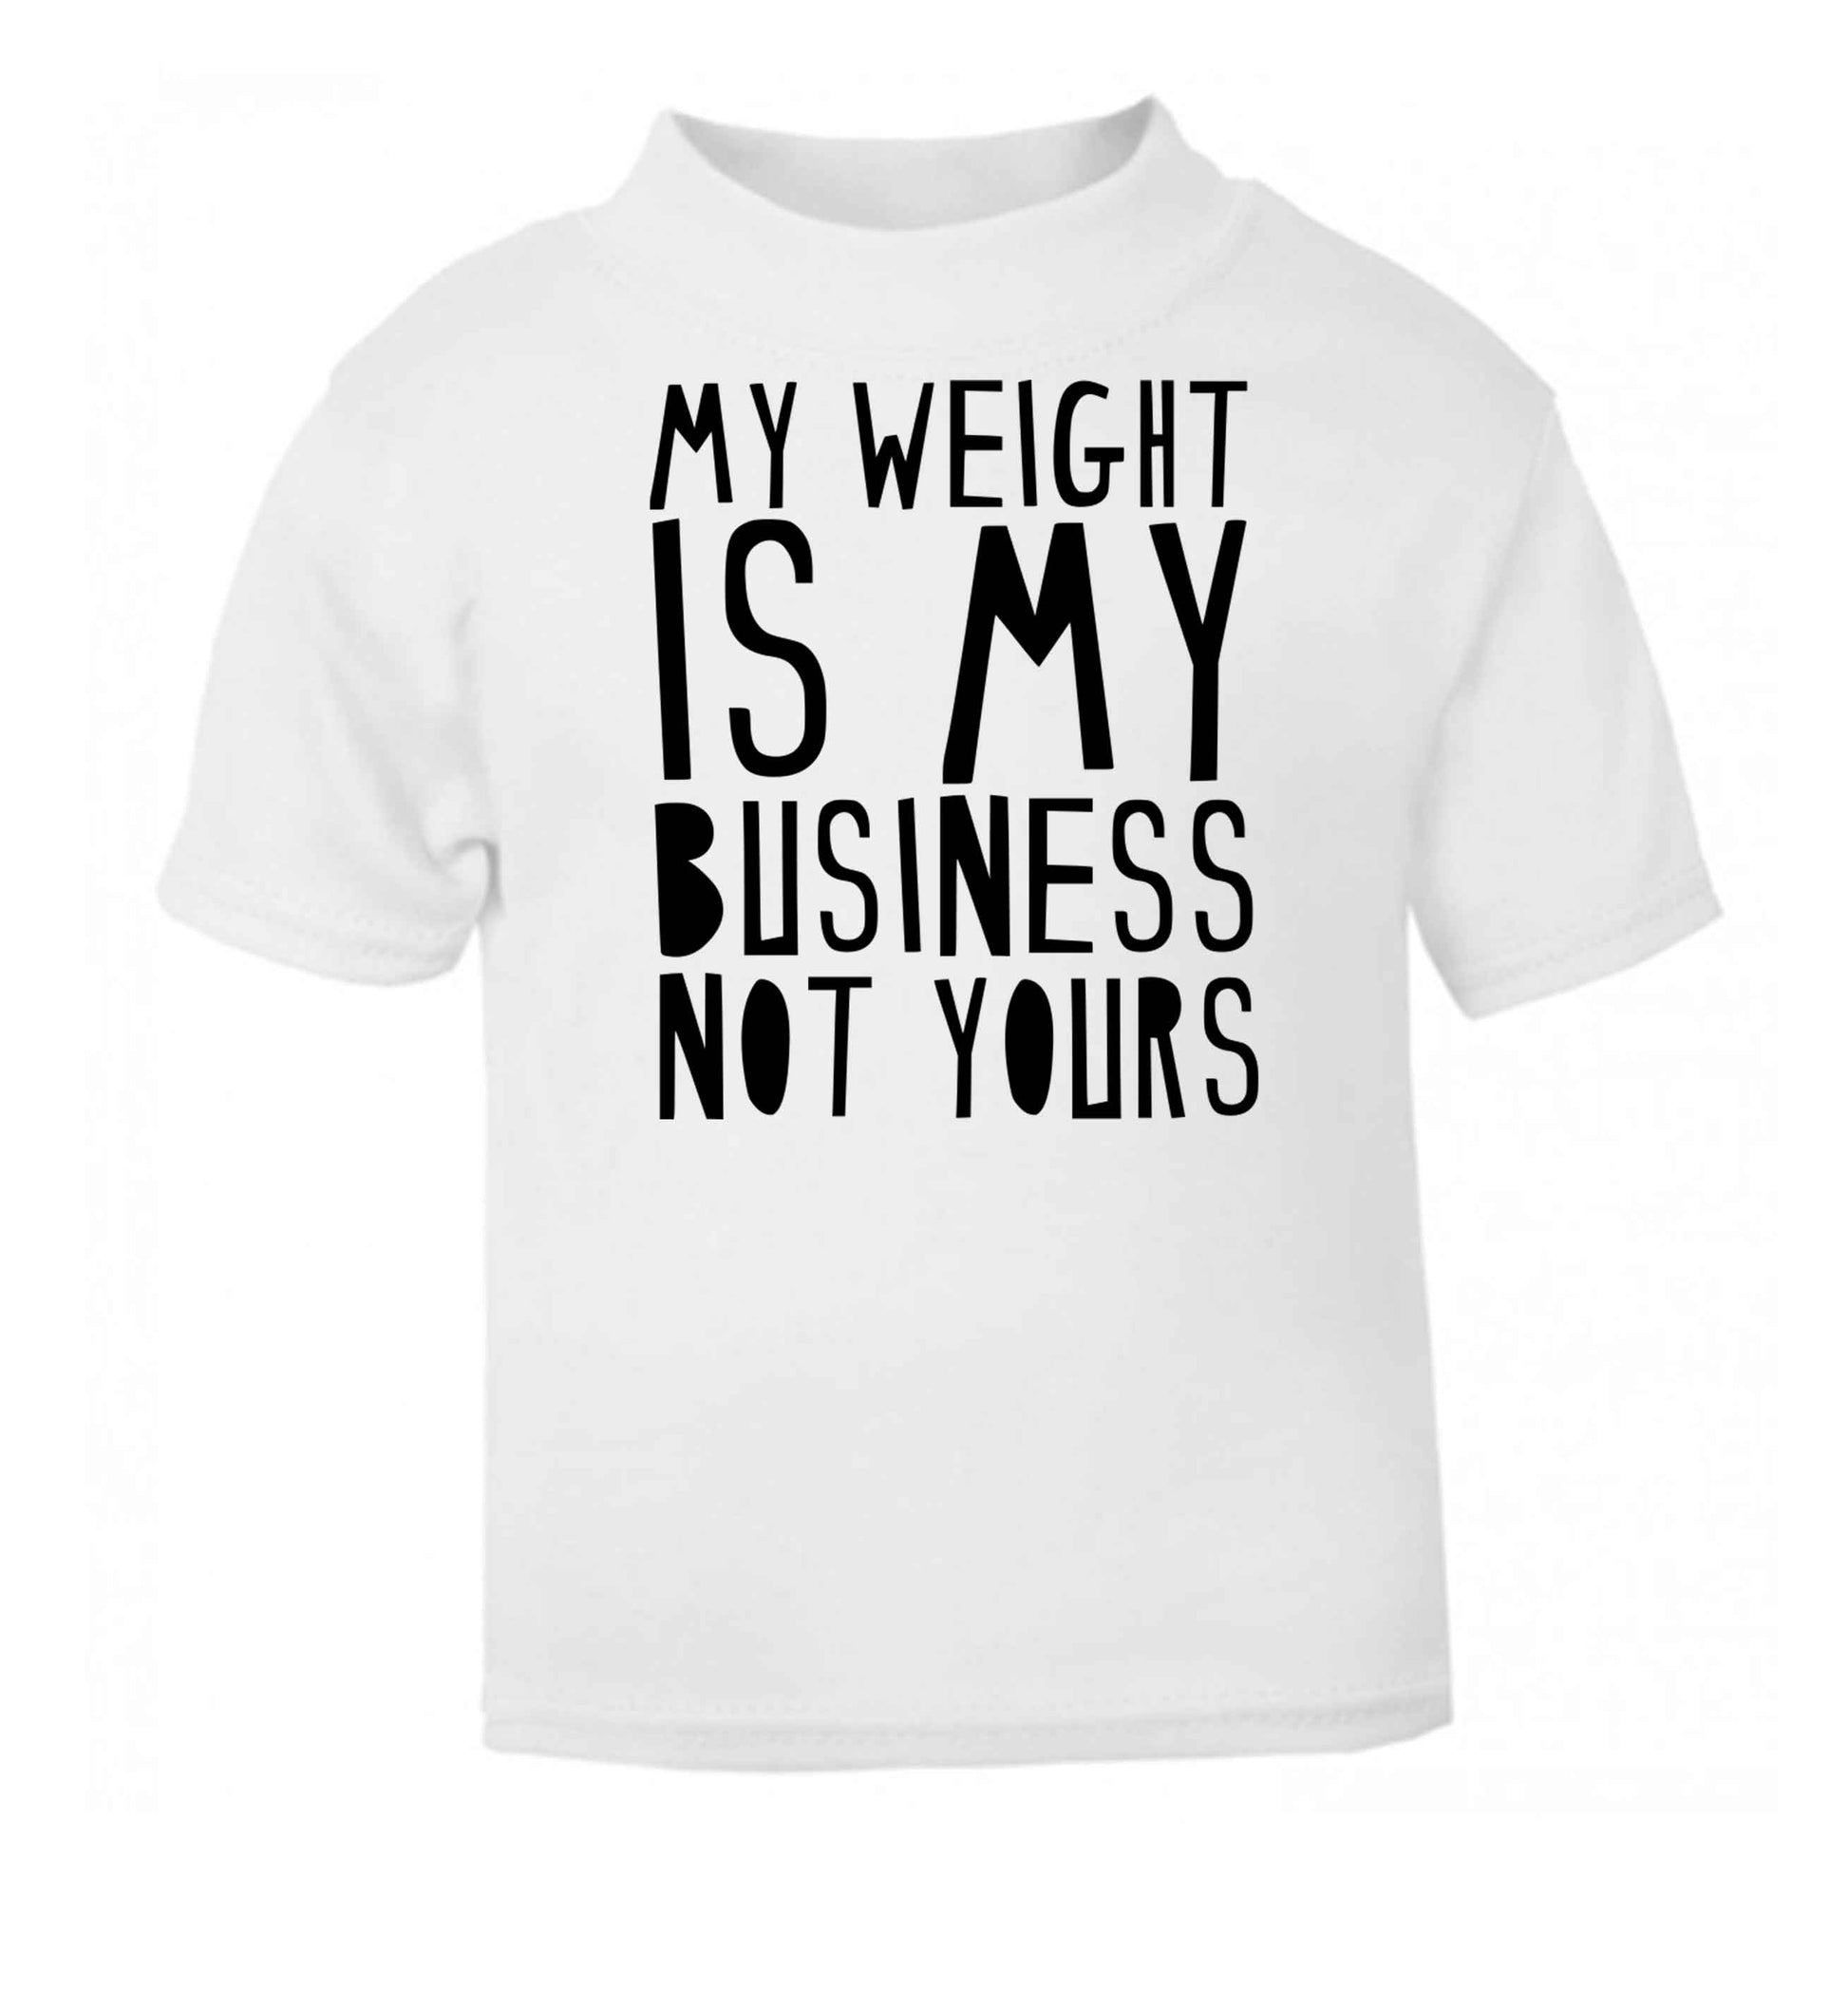 My weight is my business not yours white baby toddler Tshirt 2 Years